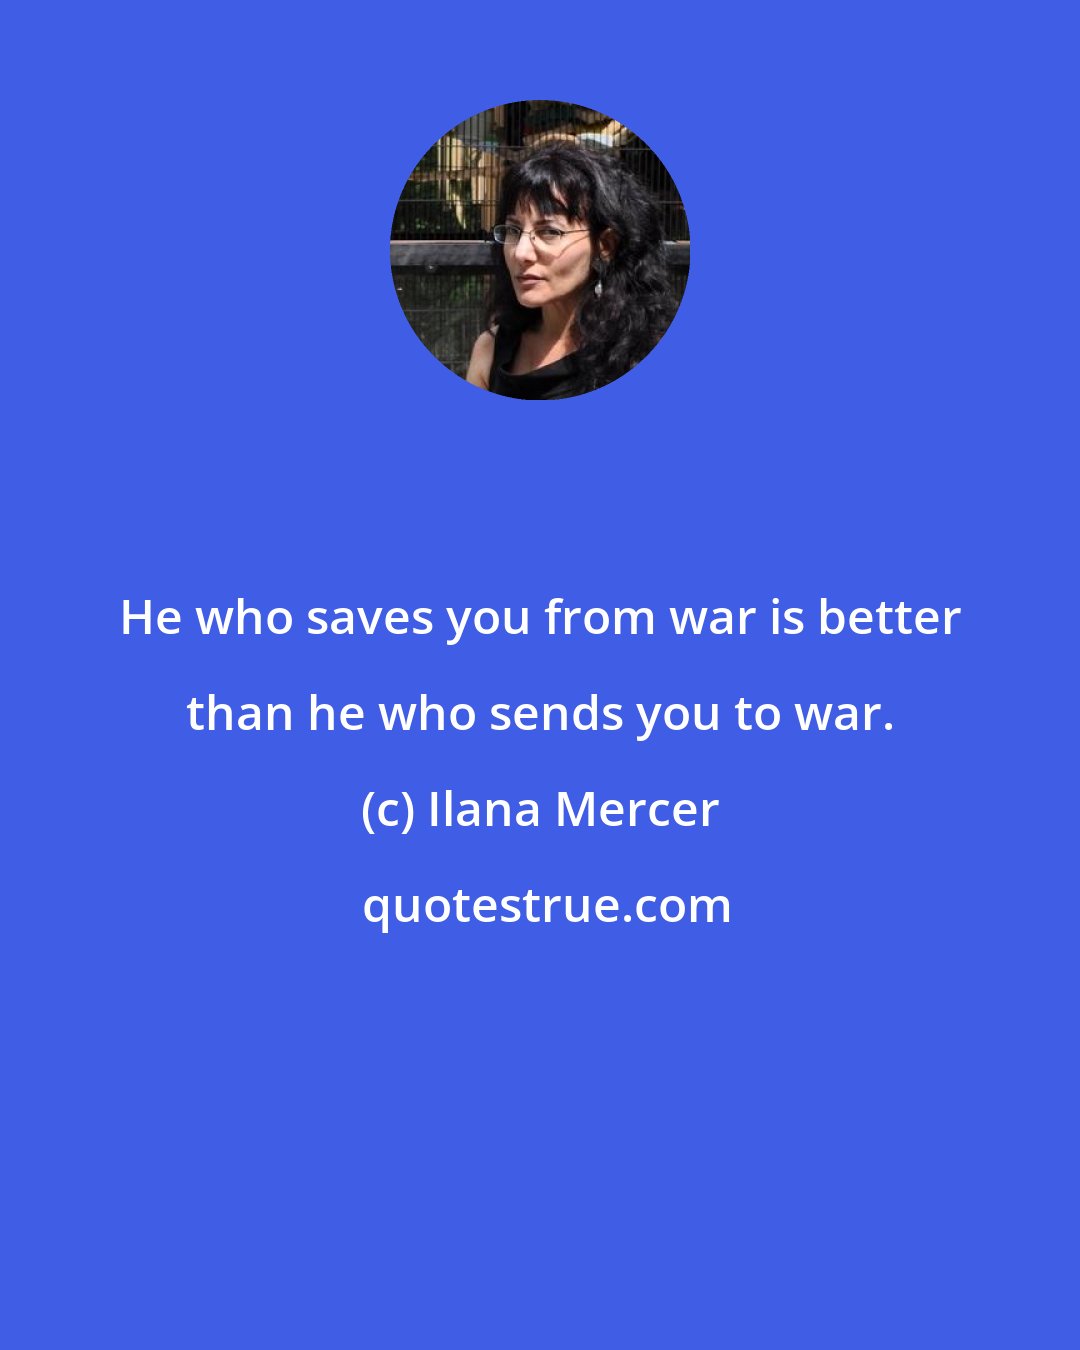 Ilana Mercer: He who saves you from war is better than he who sends you to war.